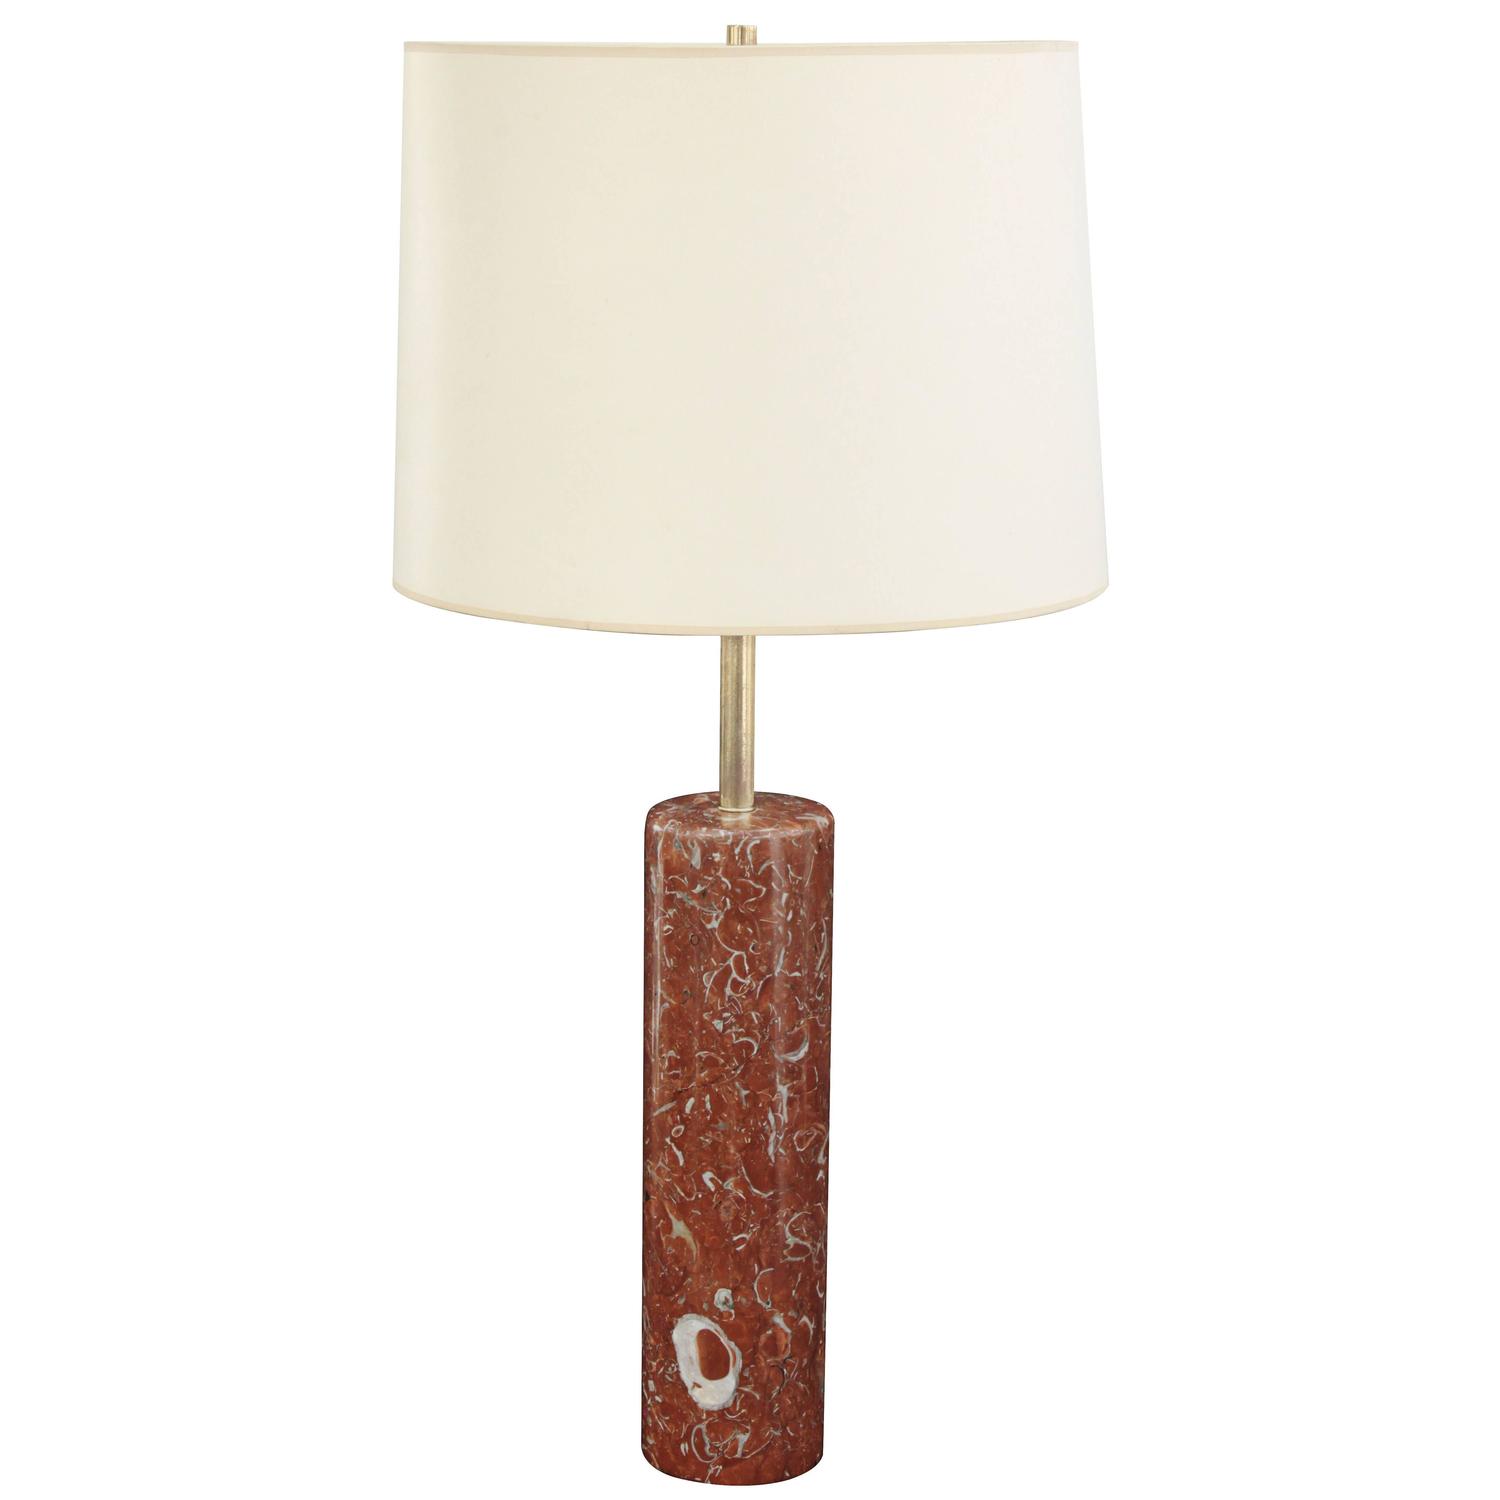 Table Lamp in Mottled Red Marble by Nessen Lamp Co For Sale at 1stdibs